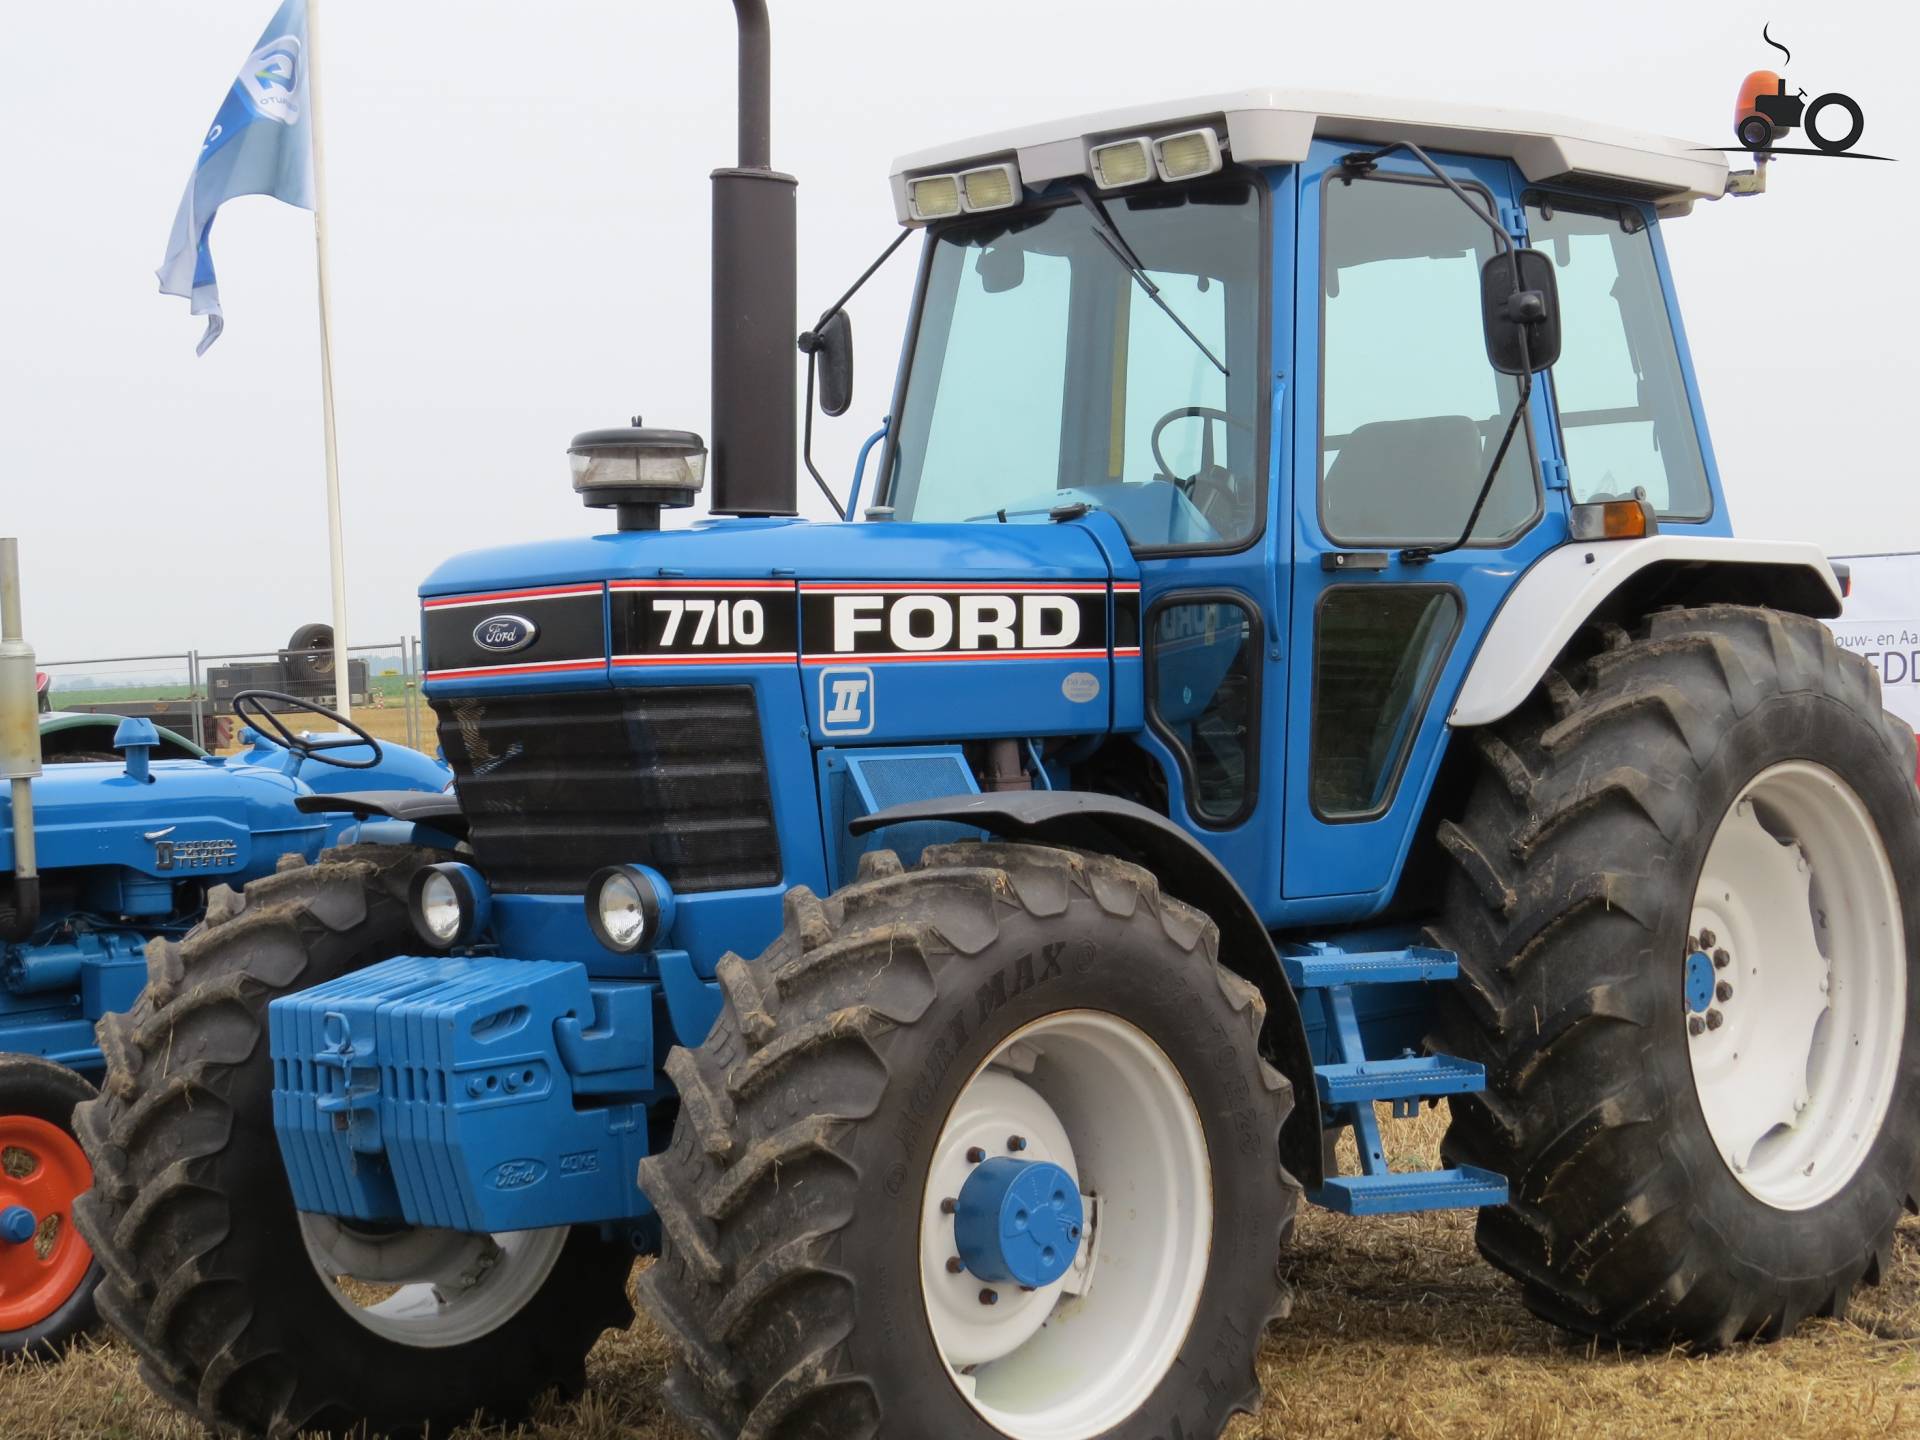 Ford 7710 Specs and data - Everything about the Ford 7710